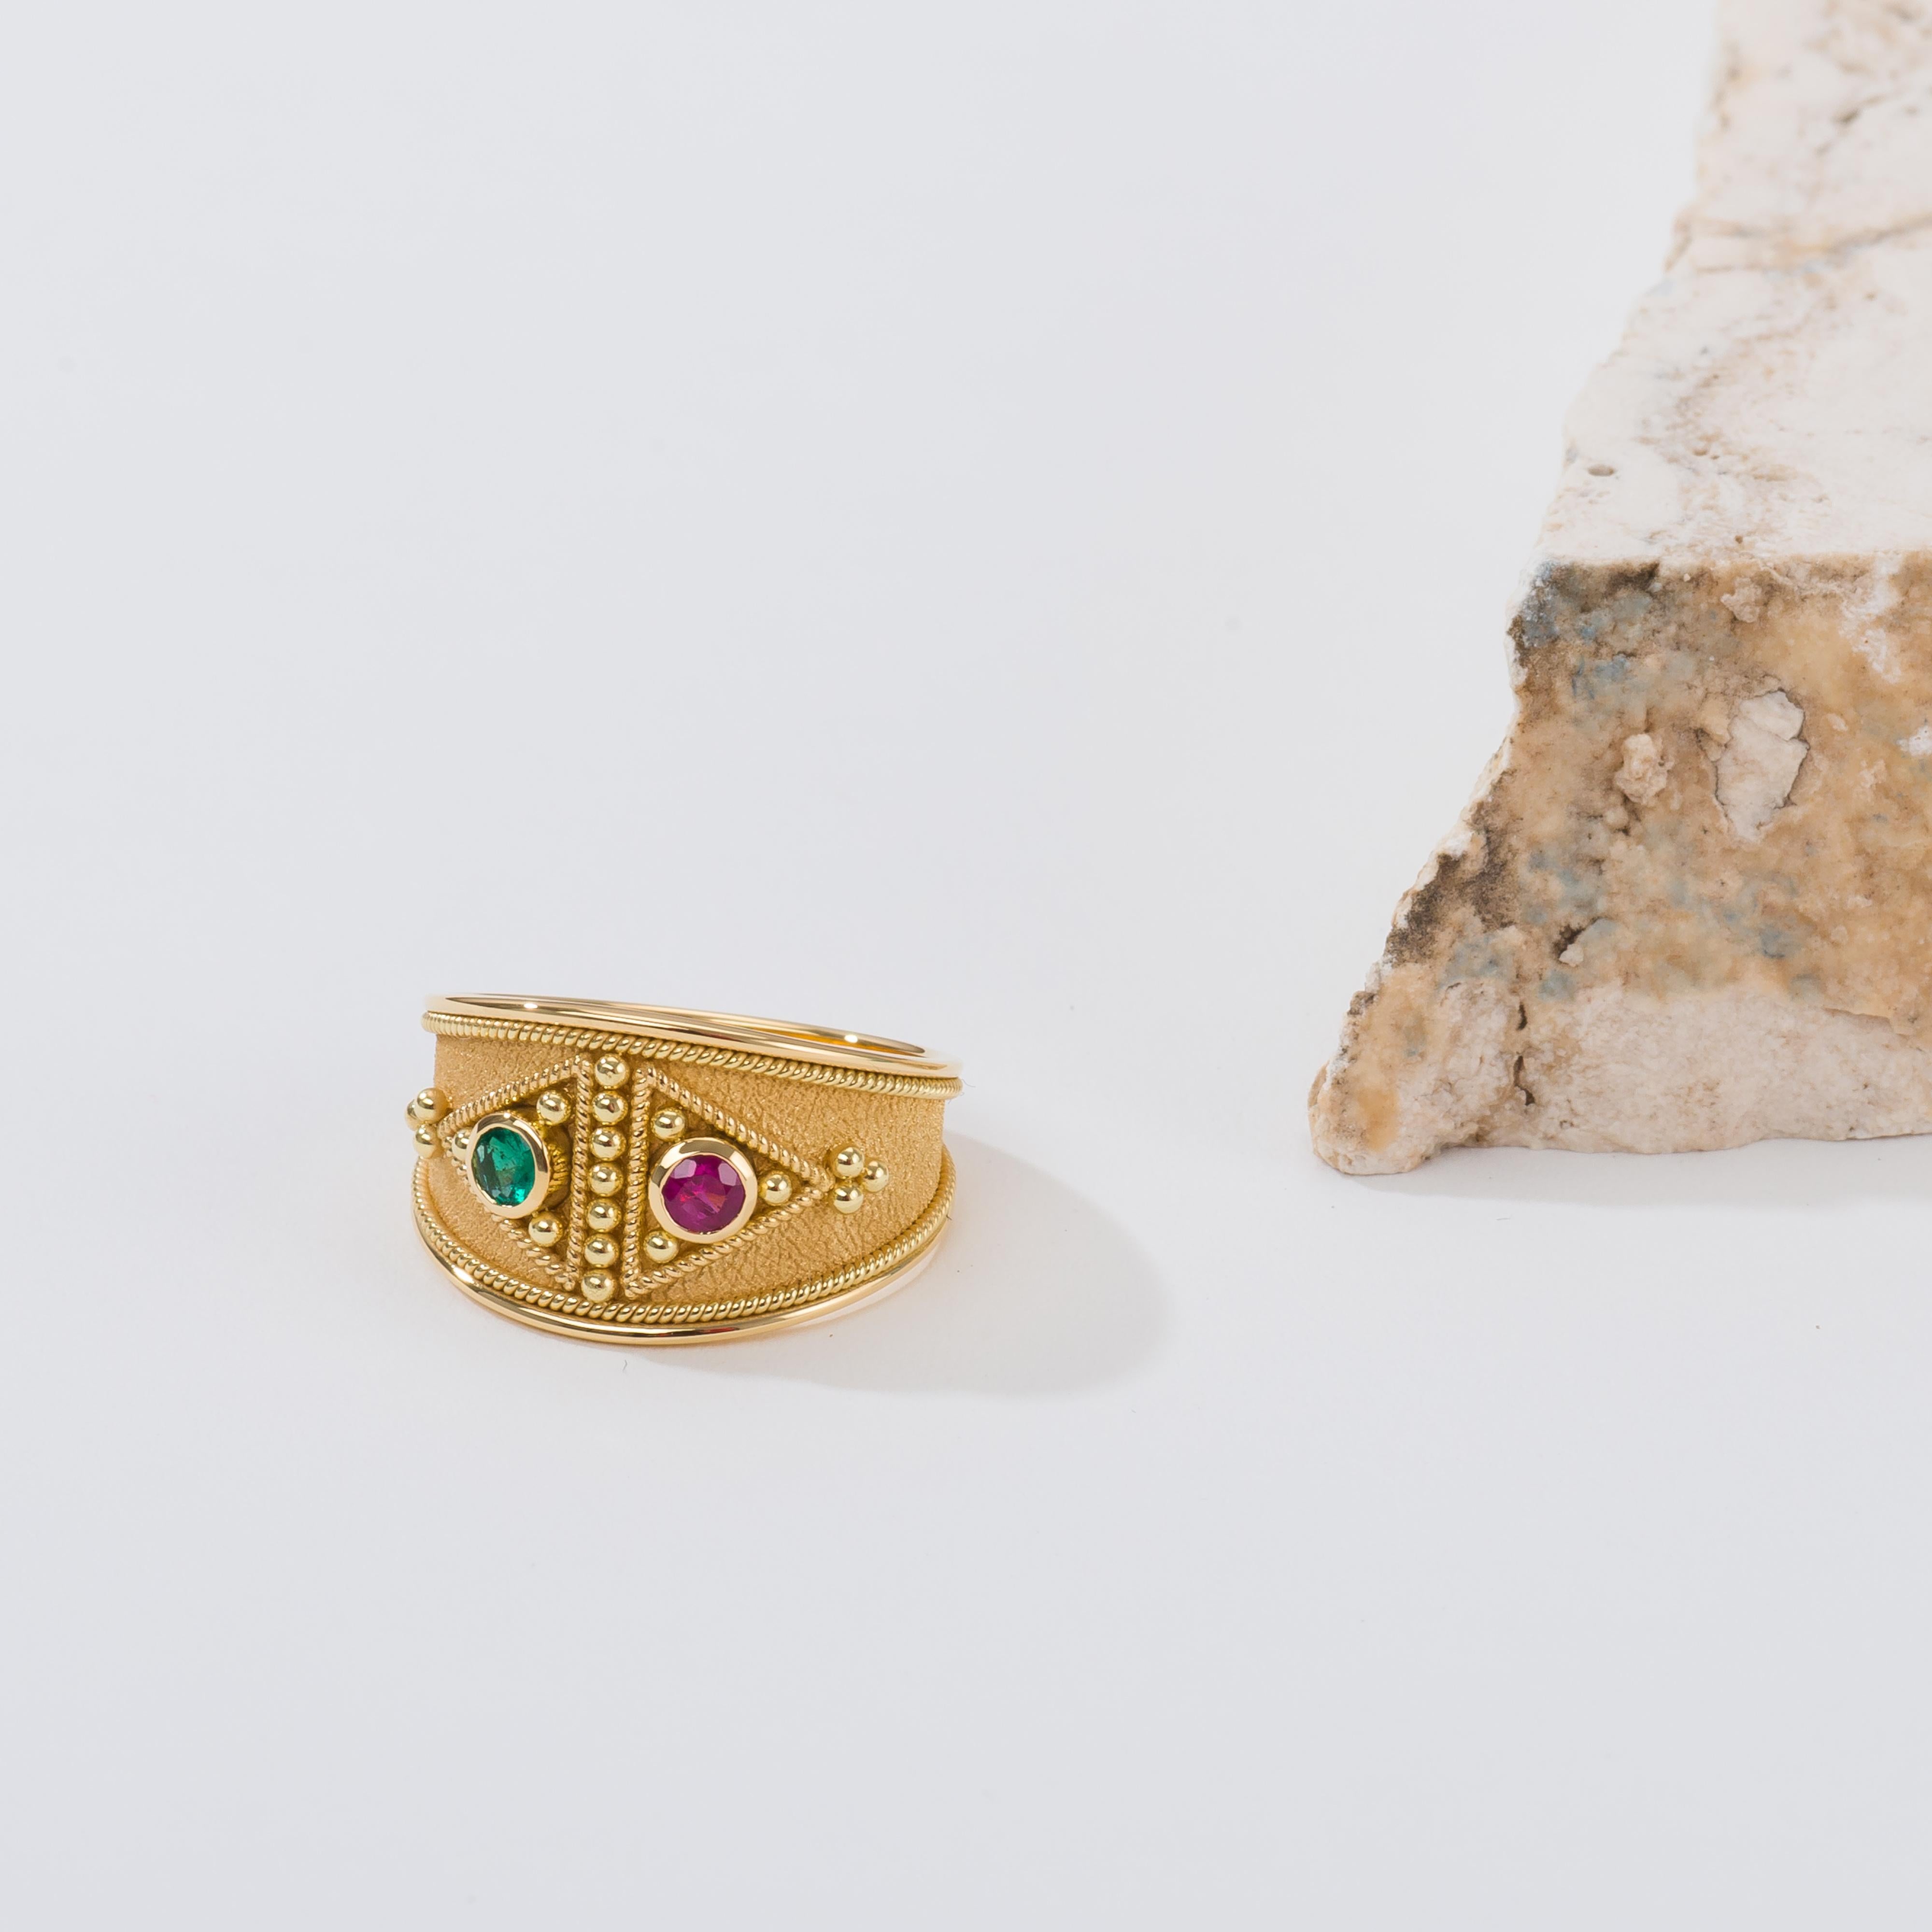 Admire the enchanting design of interlocking gold rope triangles, each embracing a round emerald and a round ruby, a harmonious blend of shape and color that adds a touch of elegance and mystique to your style.

100% handmade in our